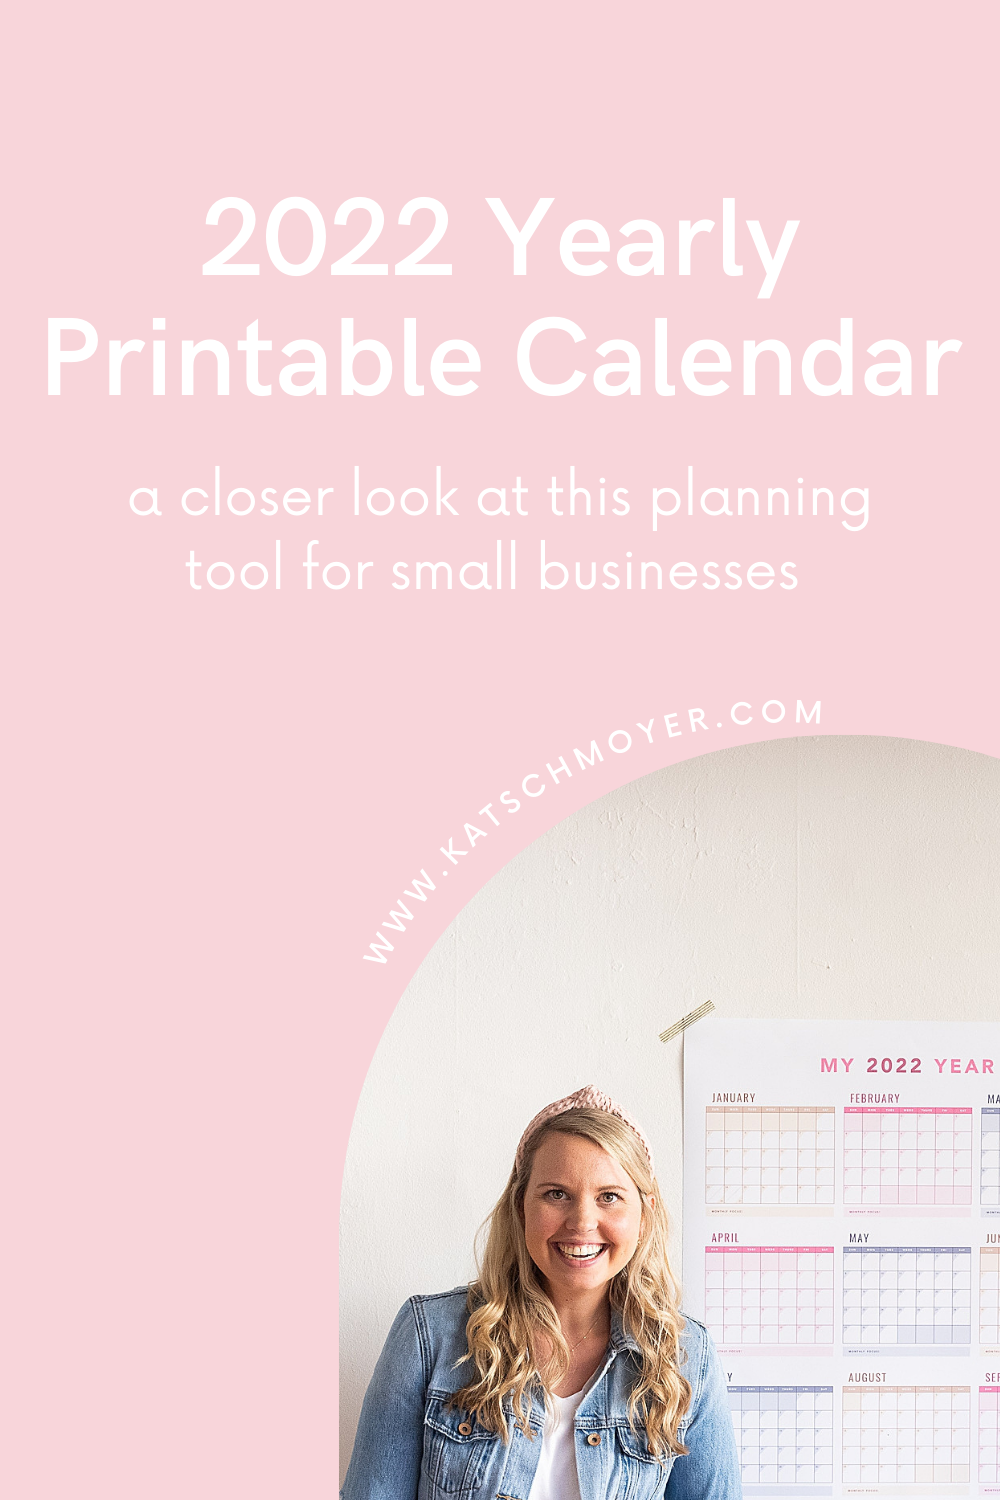 2022 Yearly Printable Calendar: a closer look, information and how to use from Kat Schmoyer, business coach and integrator for small businesses